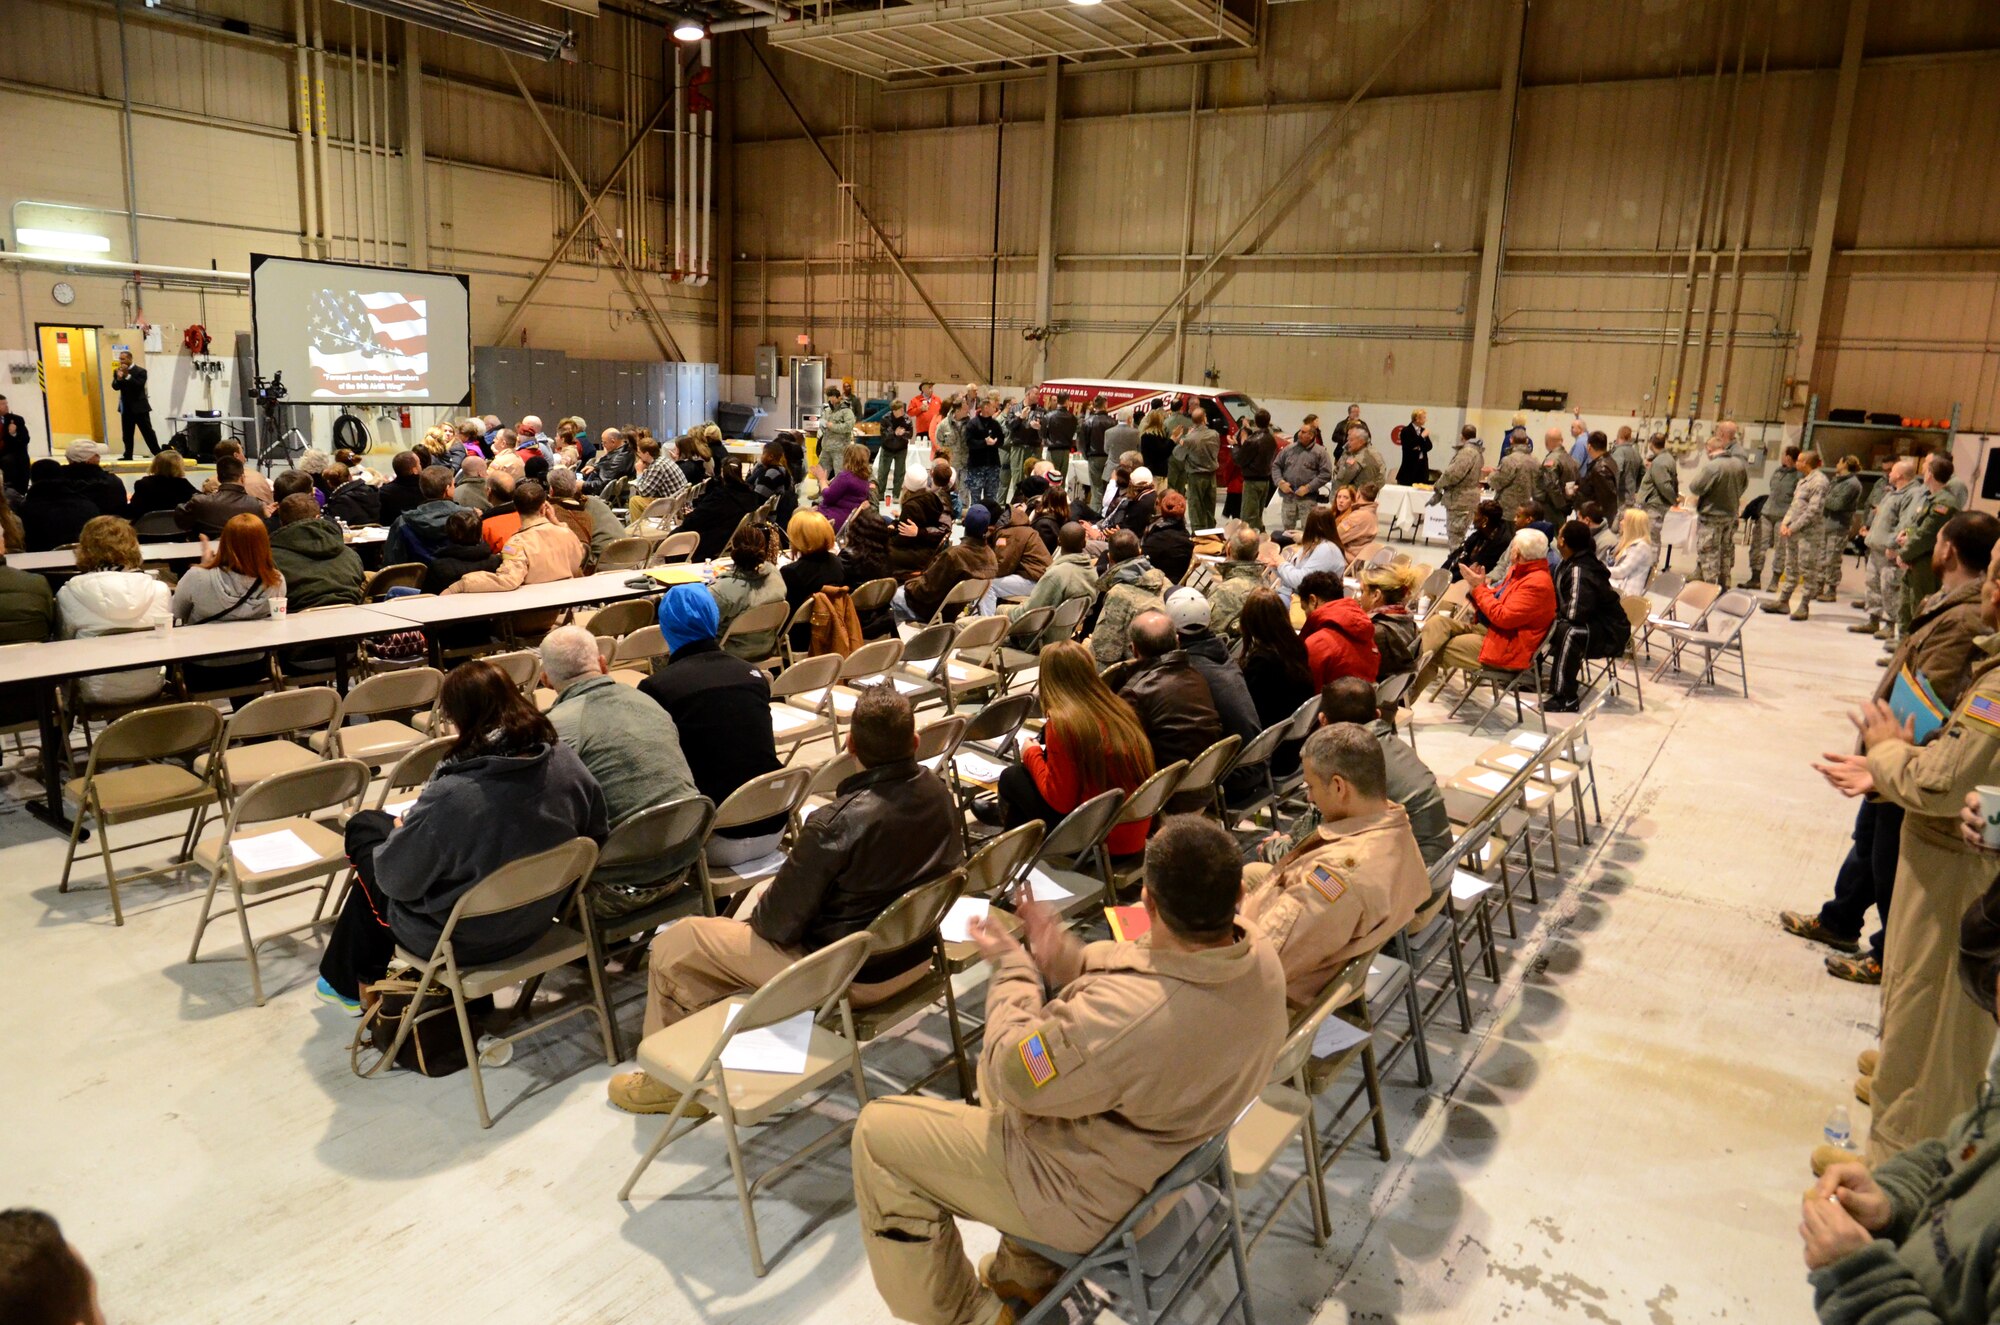 Team Dobbins members wait for lunch to be served during a deployment ceremony Jan. 8, 2015 at Dobbins Air Reserve Base, Georgia. More than 150 members from the 94th Airlift Wing deployed to support the Central Command Area of Responsibility. (U.S. Air Force photo/Brad Fallin)
